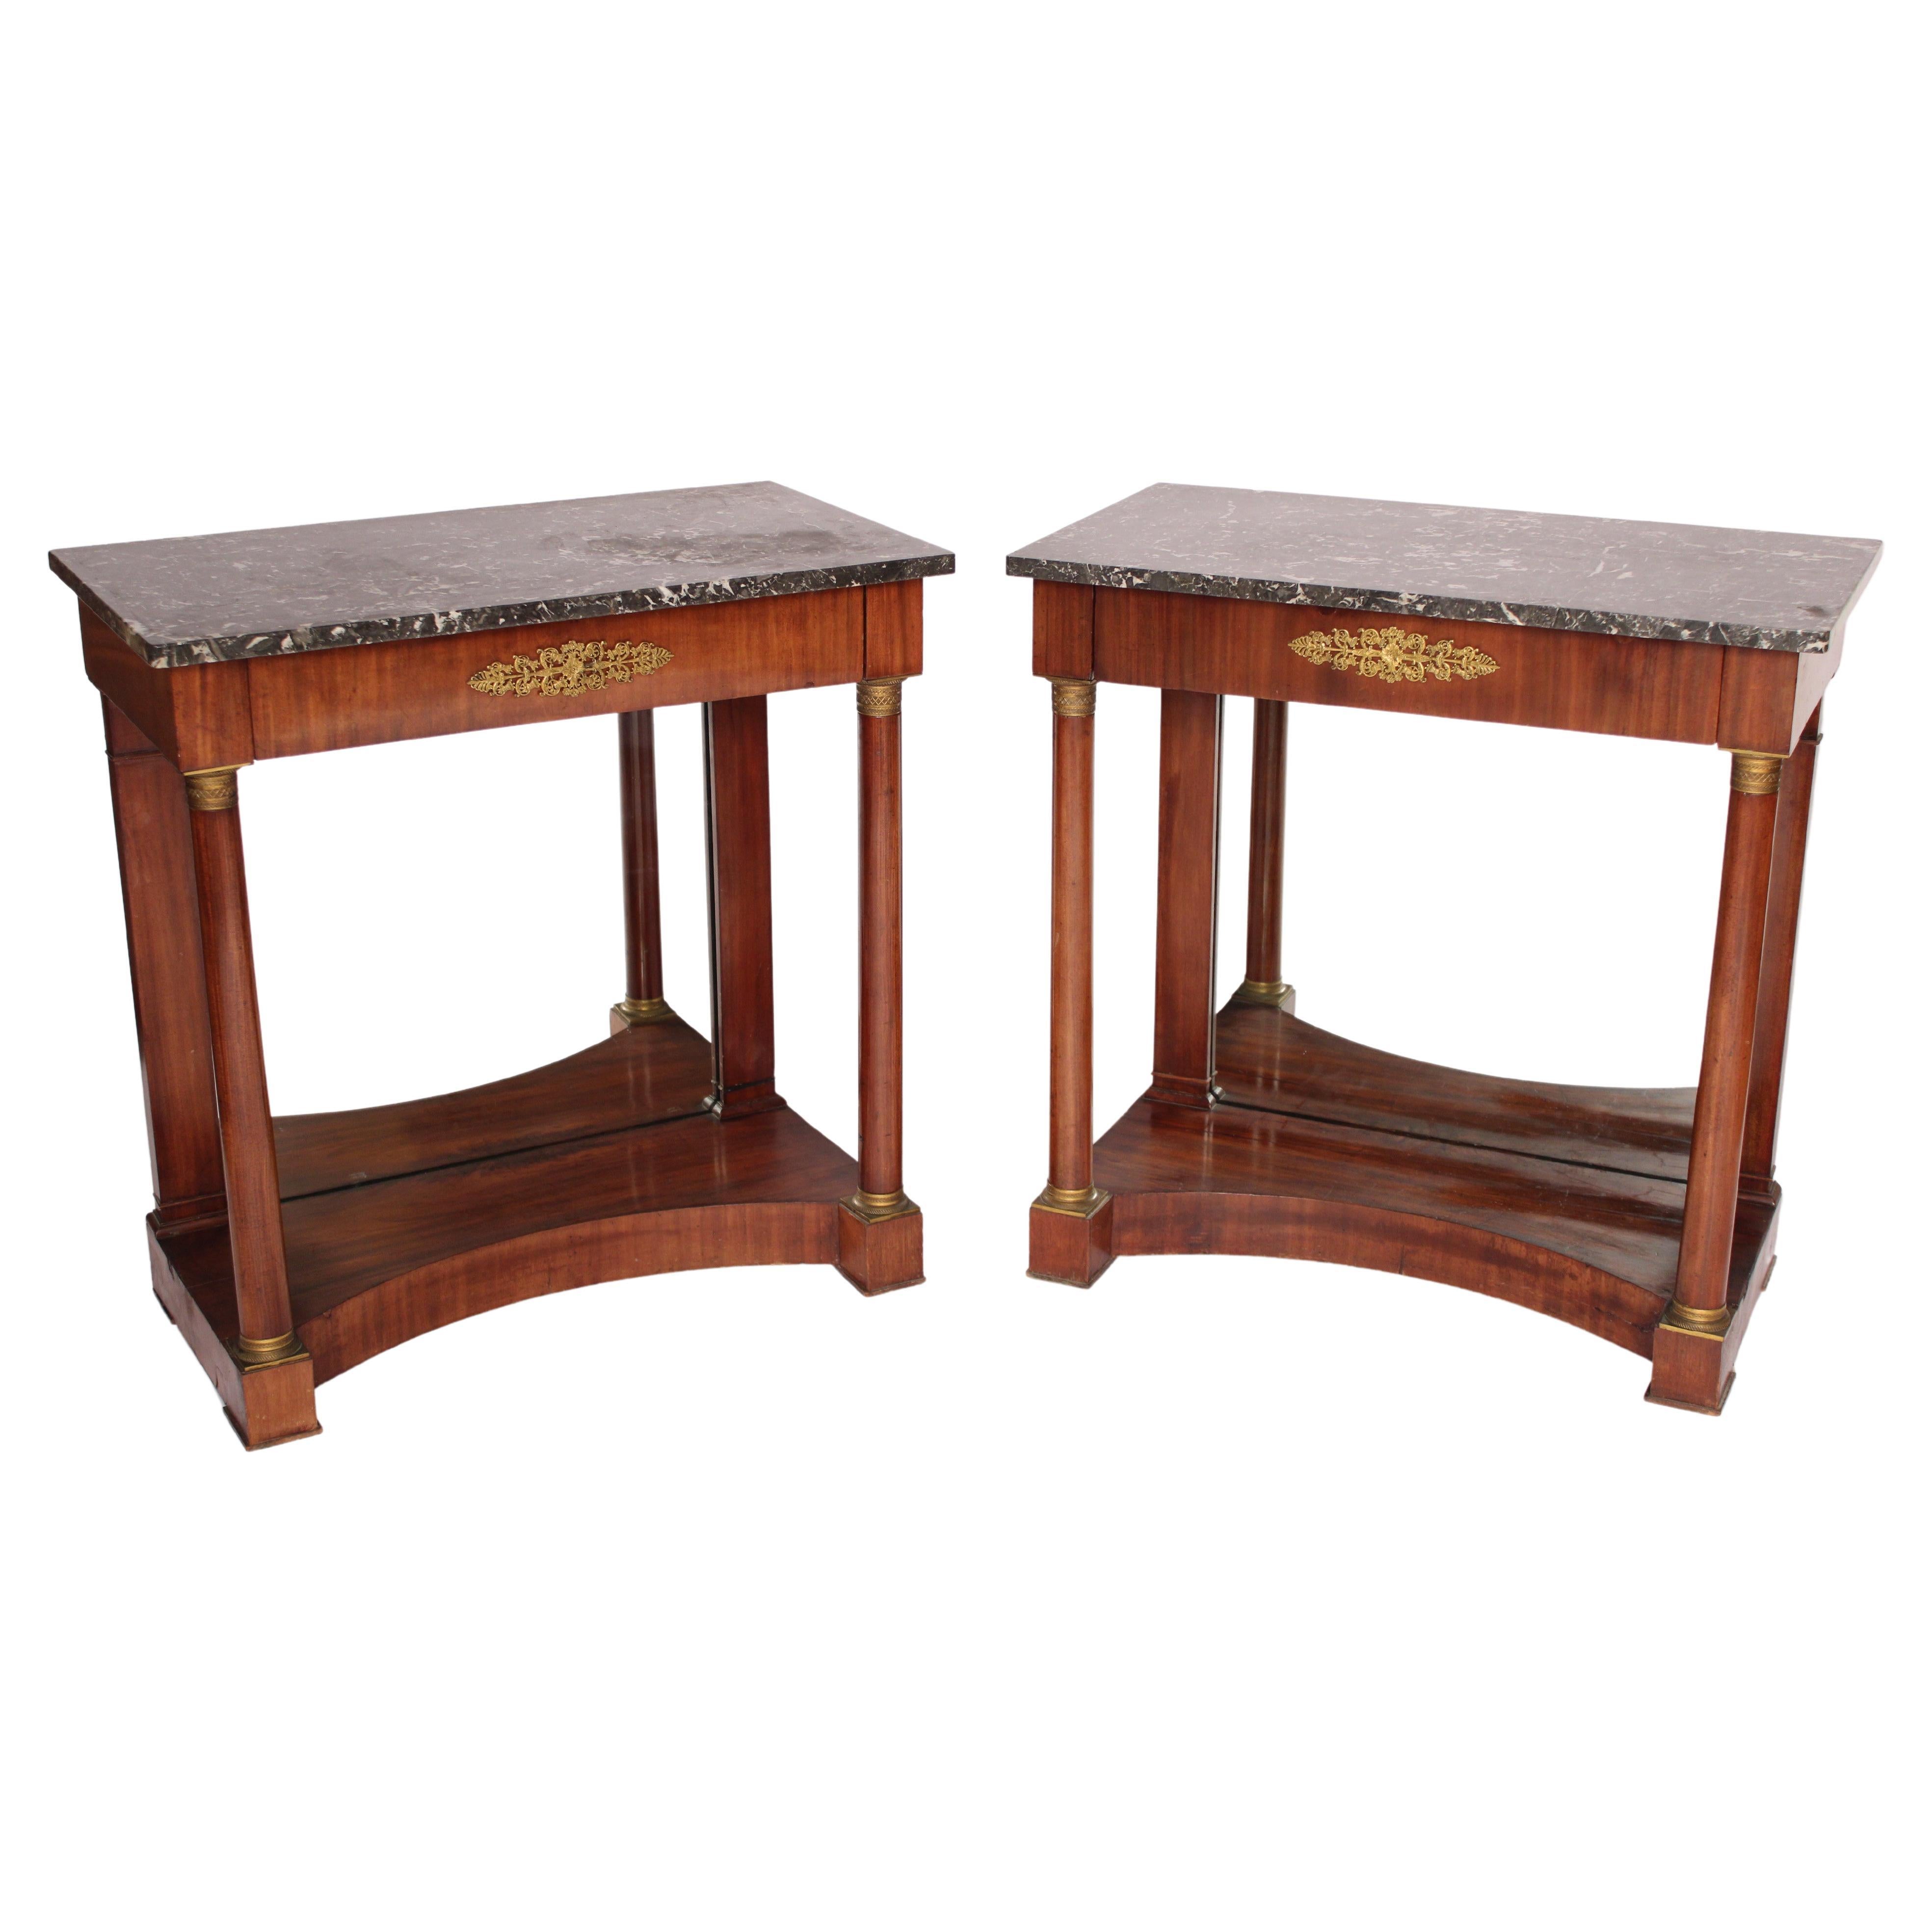 Pair of Antique Empire Style Console Tables